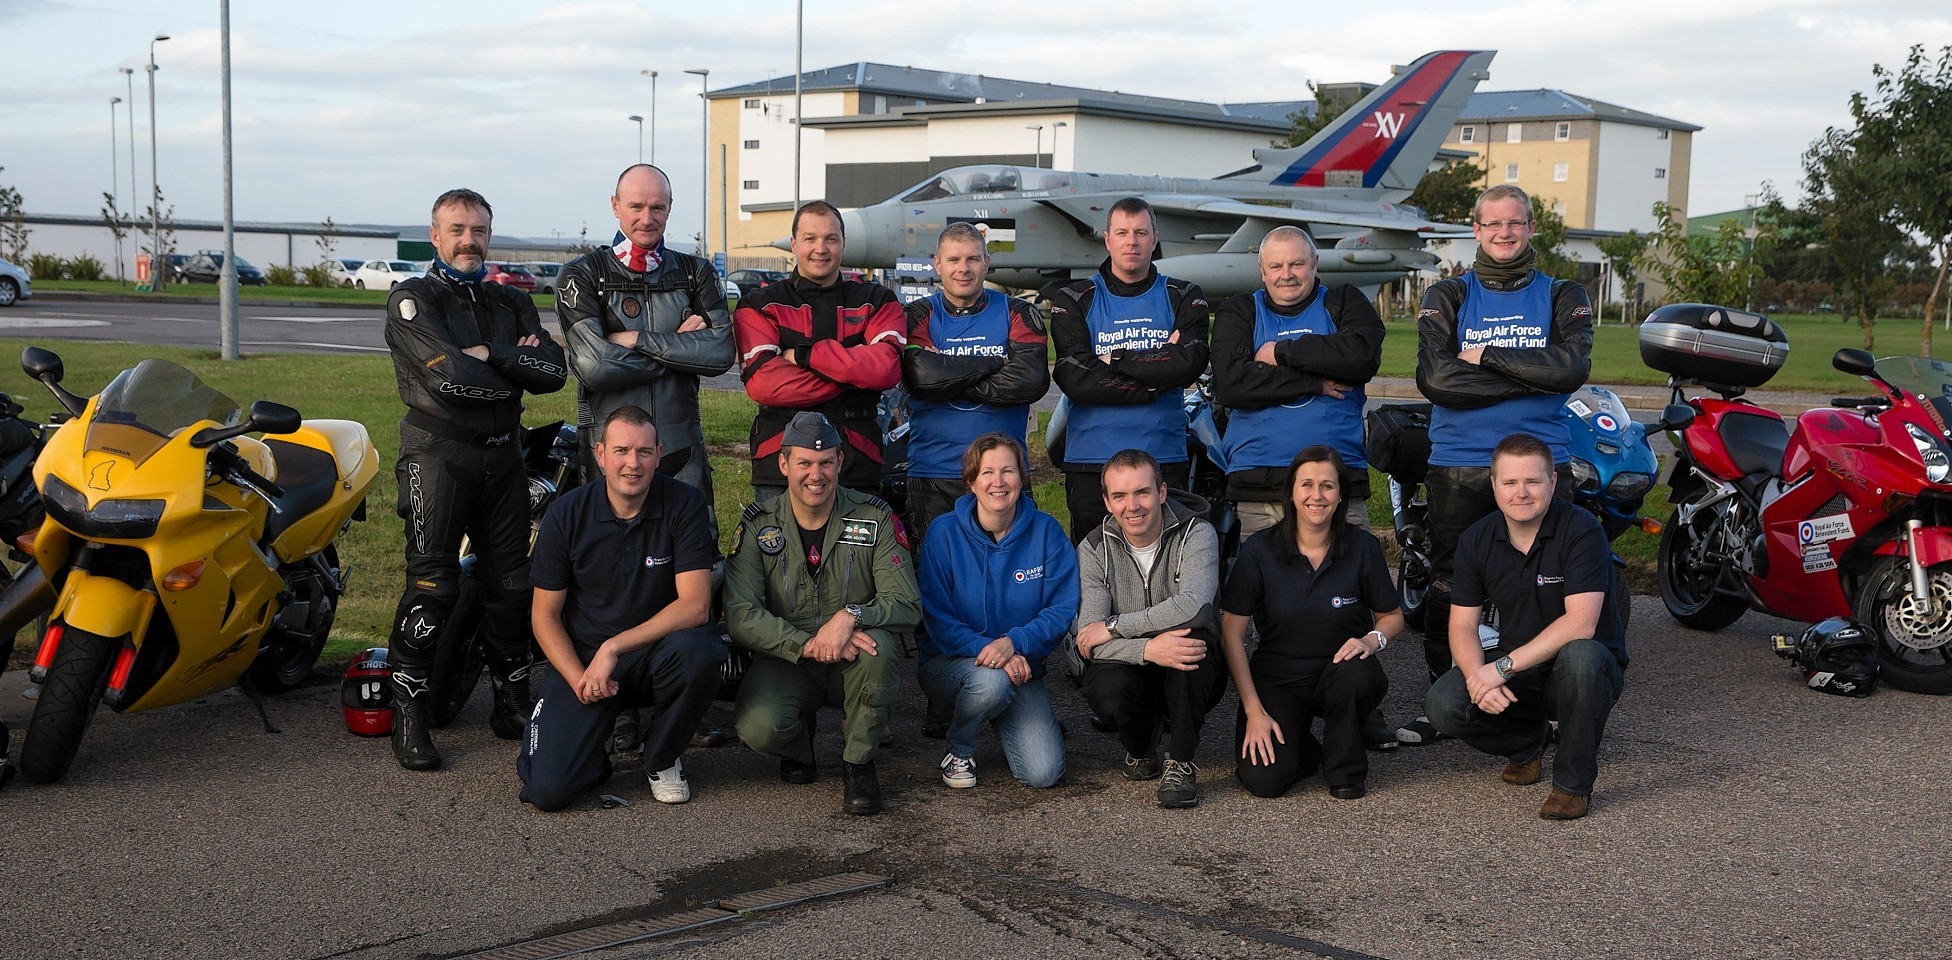 The RAF motorcyclist prepare to set out on their charity ride